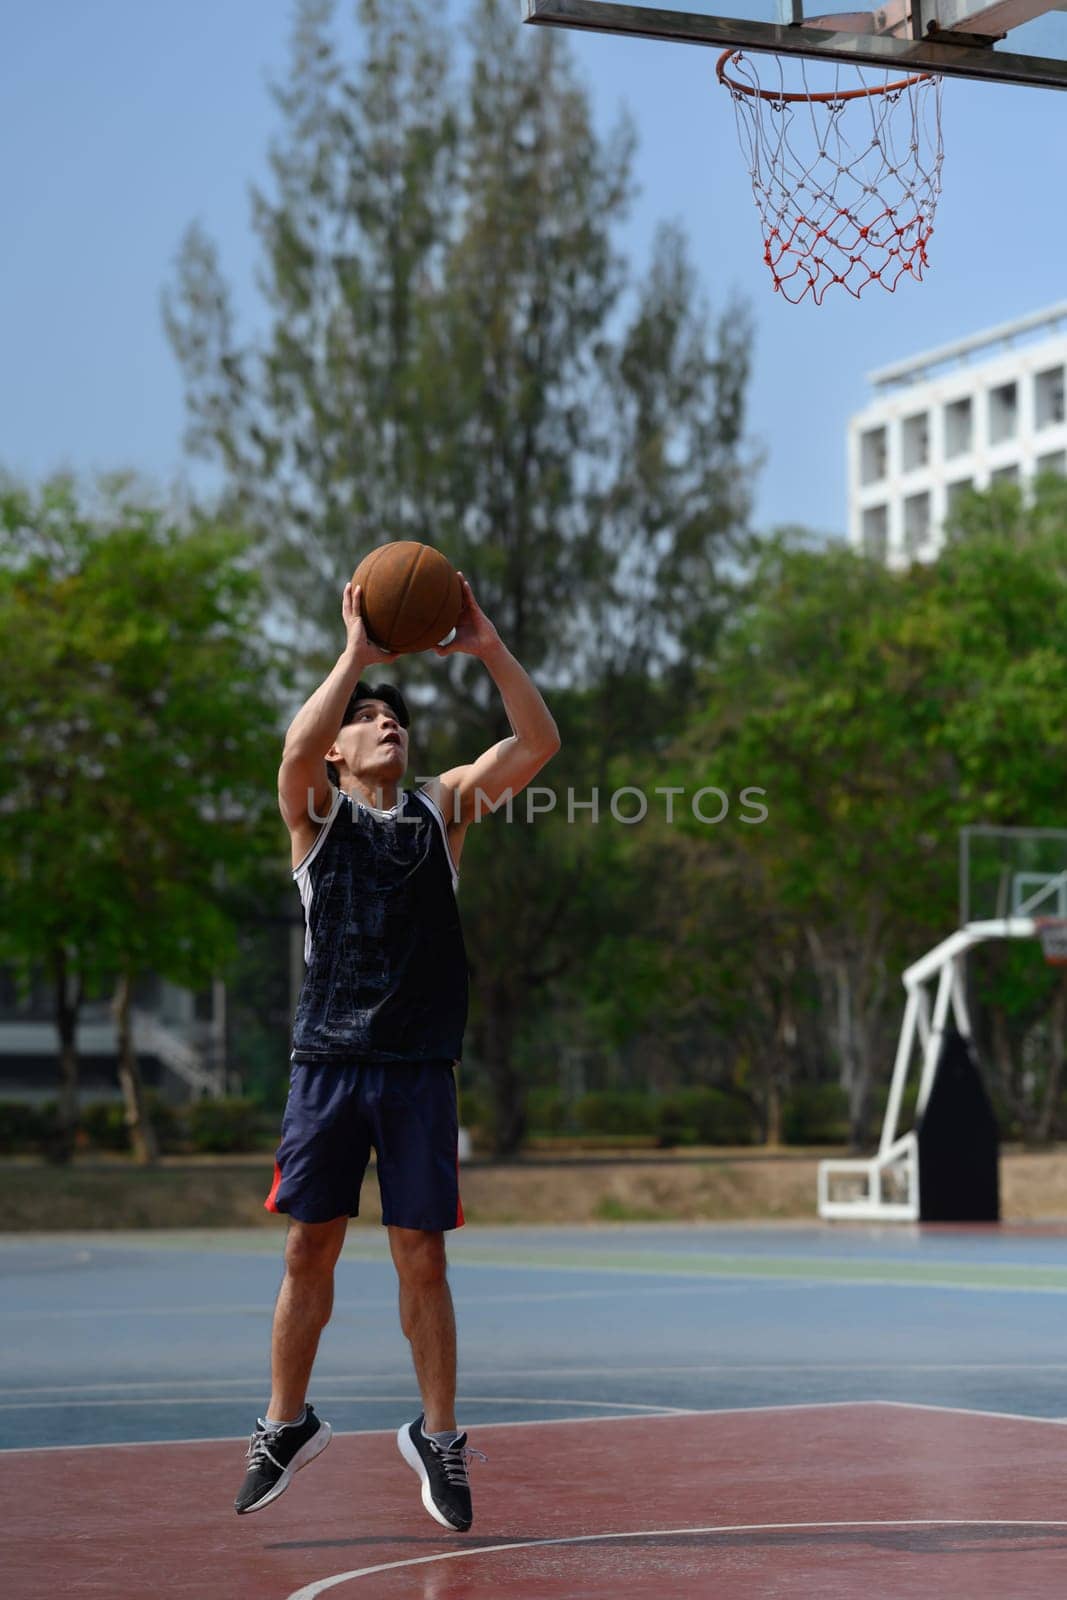 Full length of young sportsman jumping in basketball court and throwing ball to the basket.